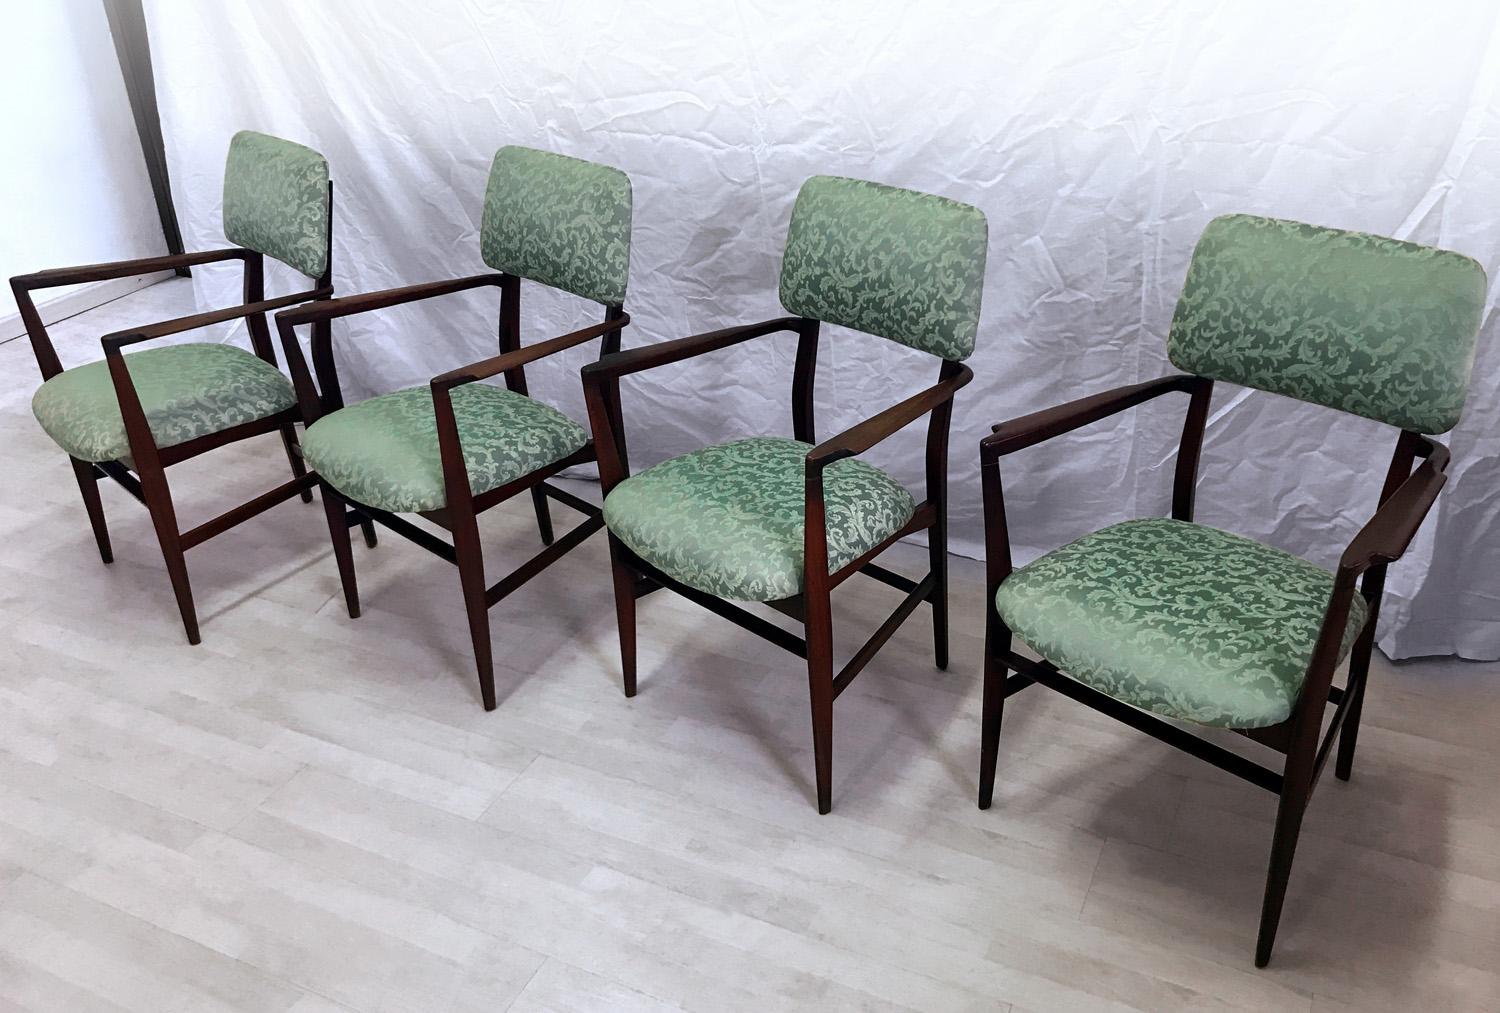 Mid-Century Modern Italian Teakwood and Green Dining Chairs by Vittorio Dassi, Set of 4, 1950s